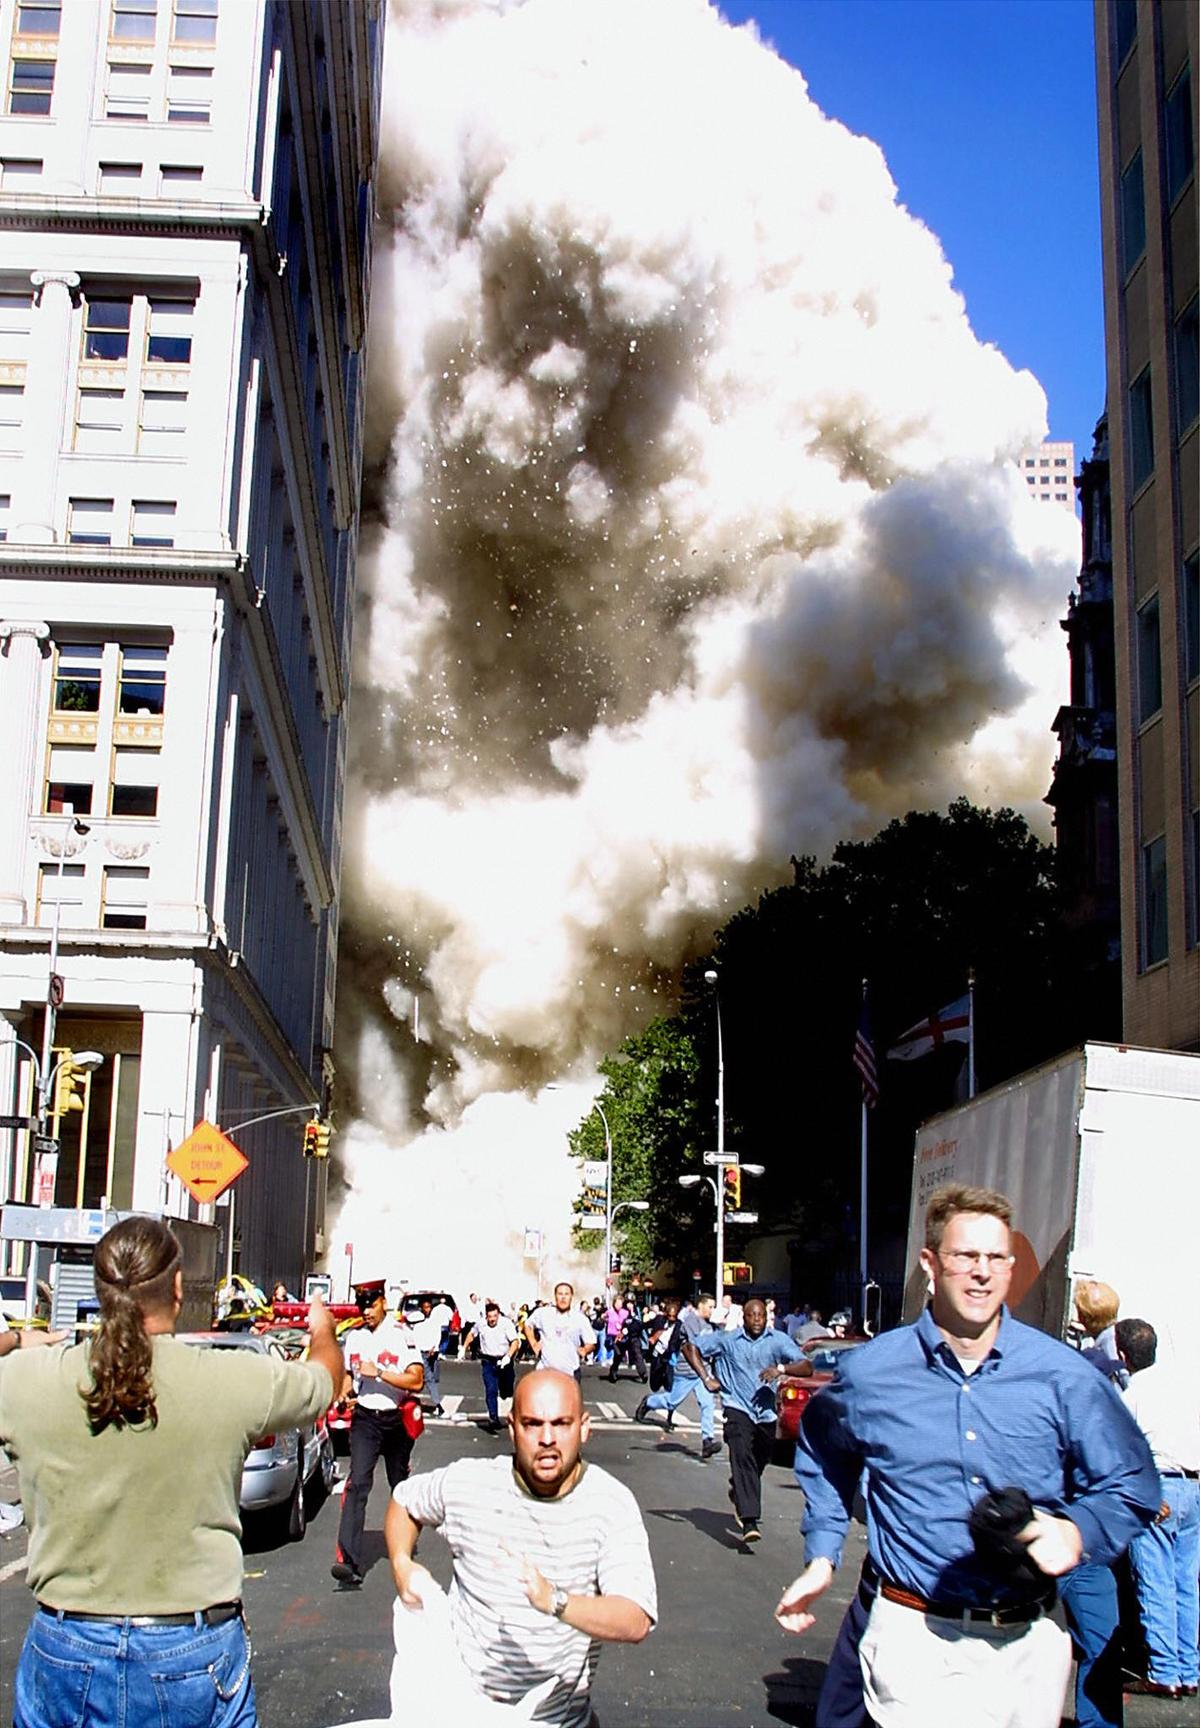 Pedestrians run from the scene as one of the World Trade Center towers collapses in New York City following a terrorist plane crash on the twin towers on Sept. 11, 2001. (Doug Kanter/AFP/Getty Images)